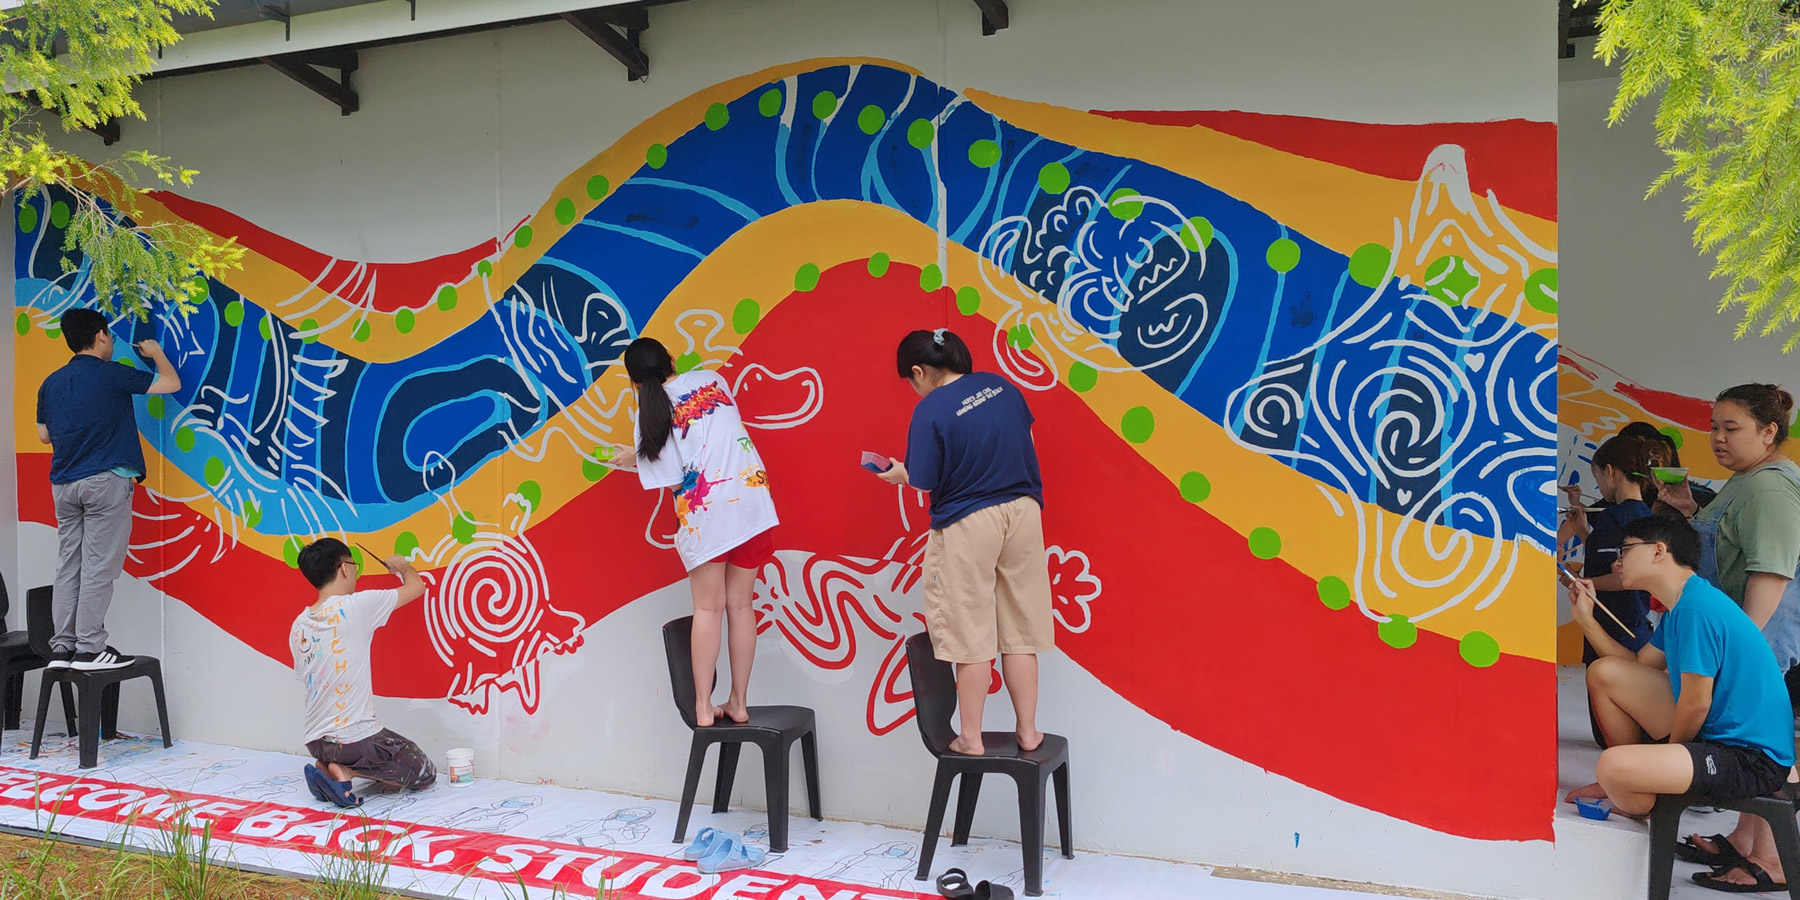 Students work on the mural.